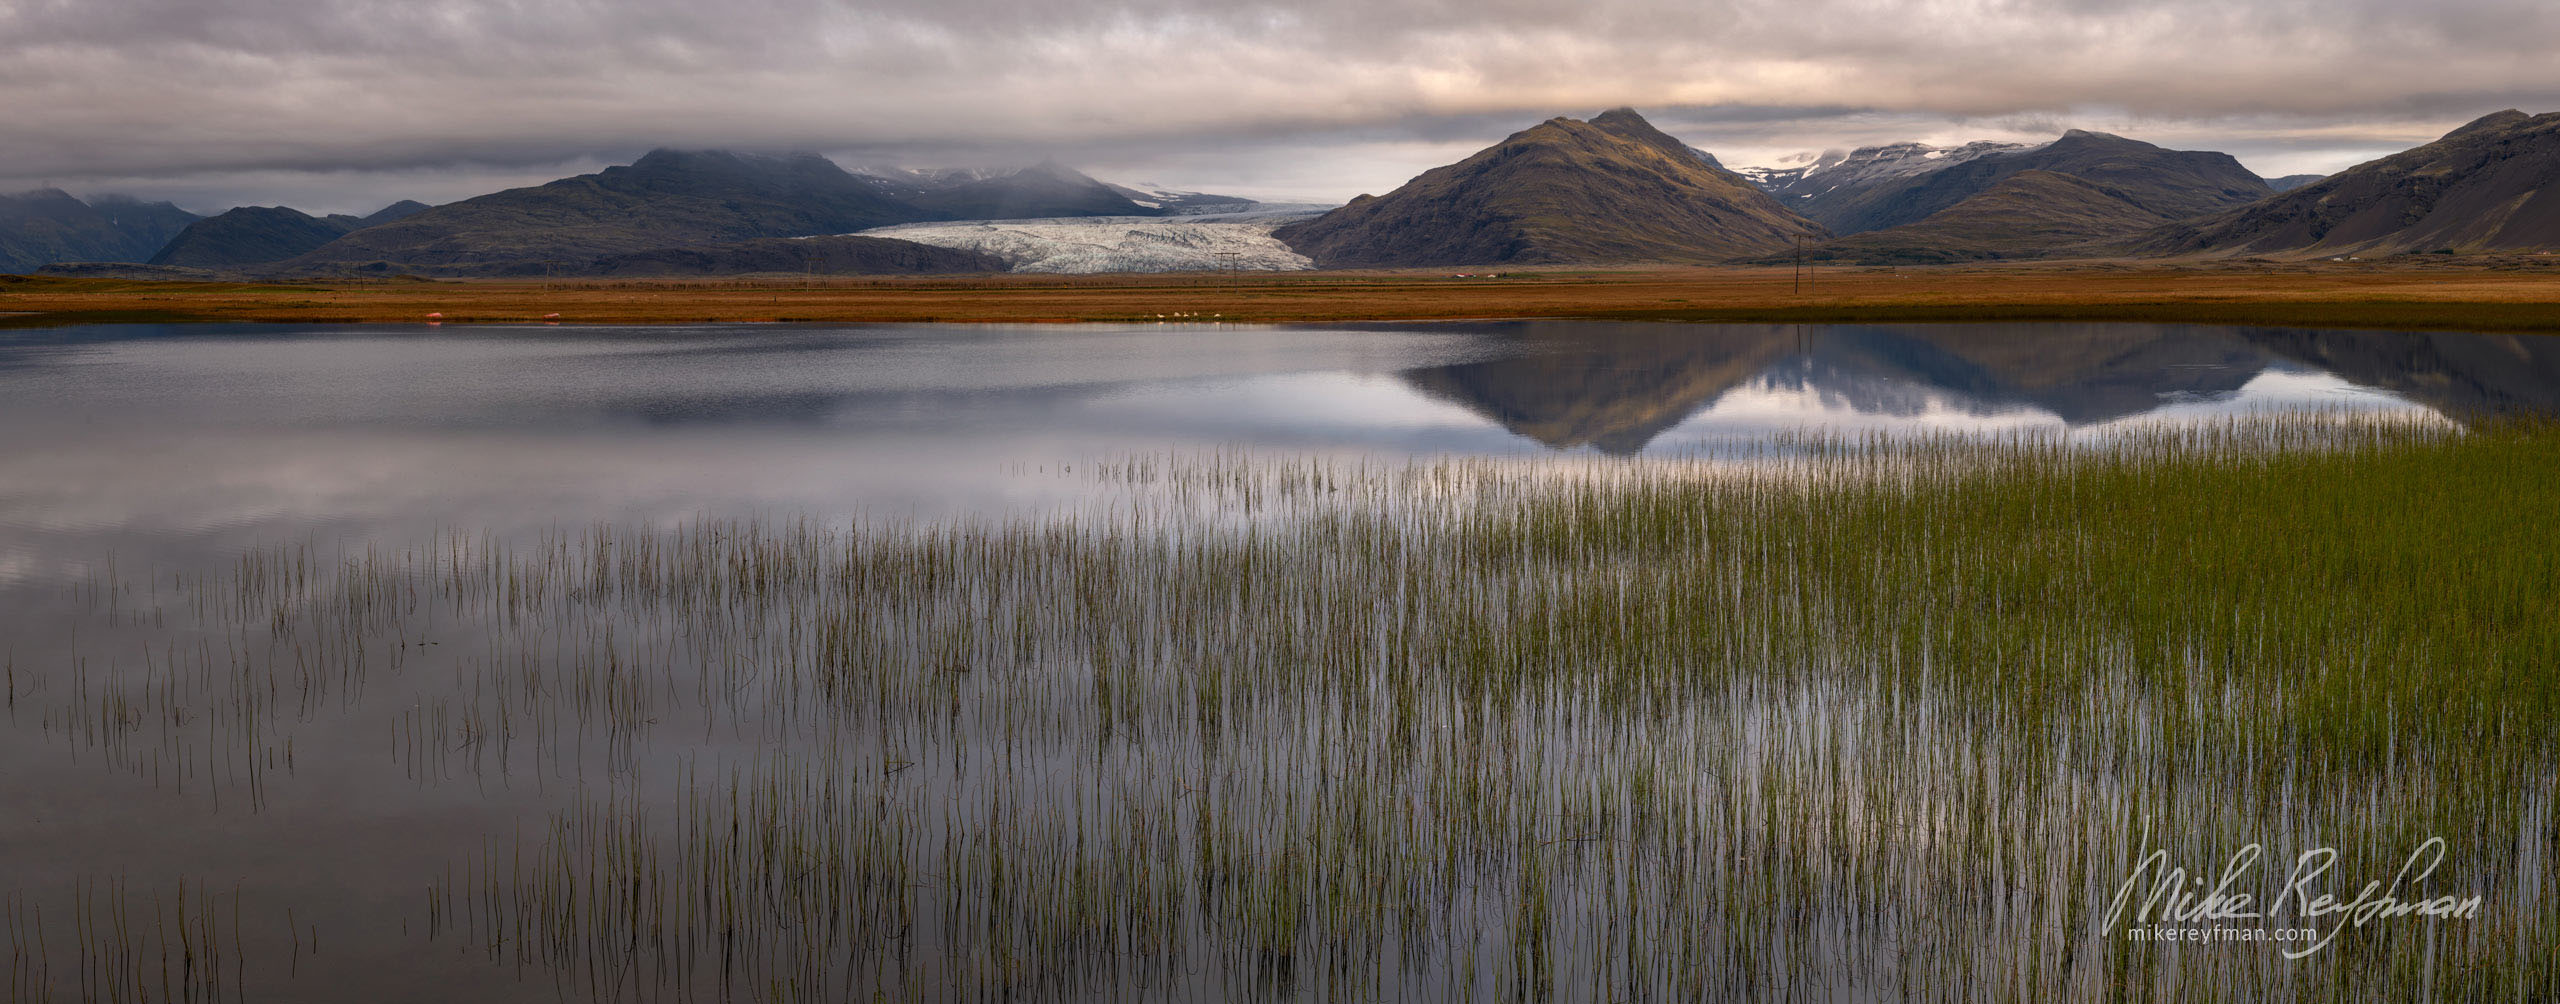 A distant view of the mountains along the Ring Road. Southeast Iceland. 050-IC-GP _50B0014_Pano-1x2.55 - Rhyolite Mountains, Crater Lakes, Geothermal Areas, Lava Fields and Glacial Rivers. Iceland.  - Mike Reyfman Photography